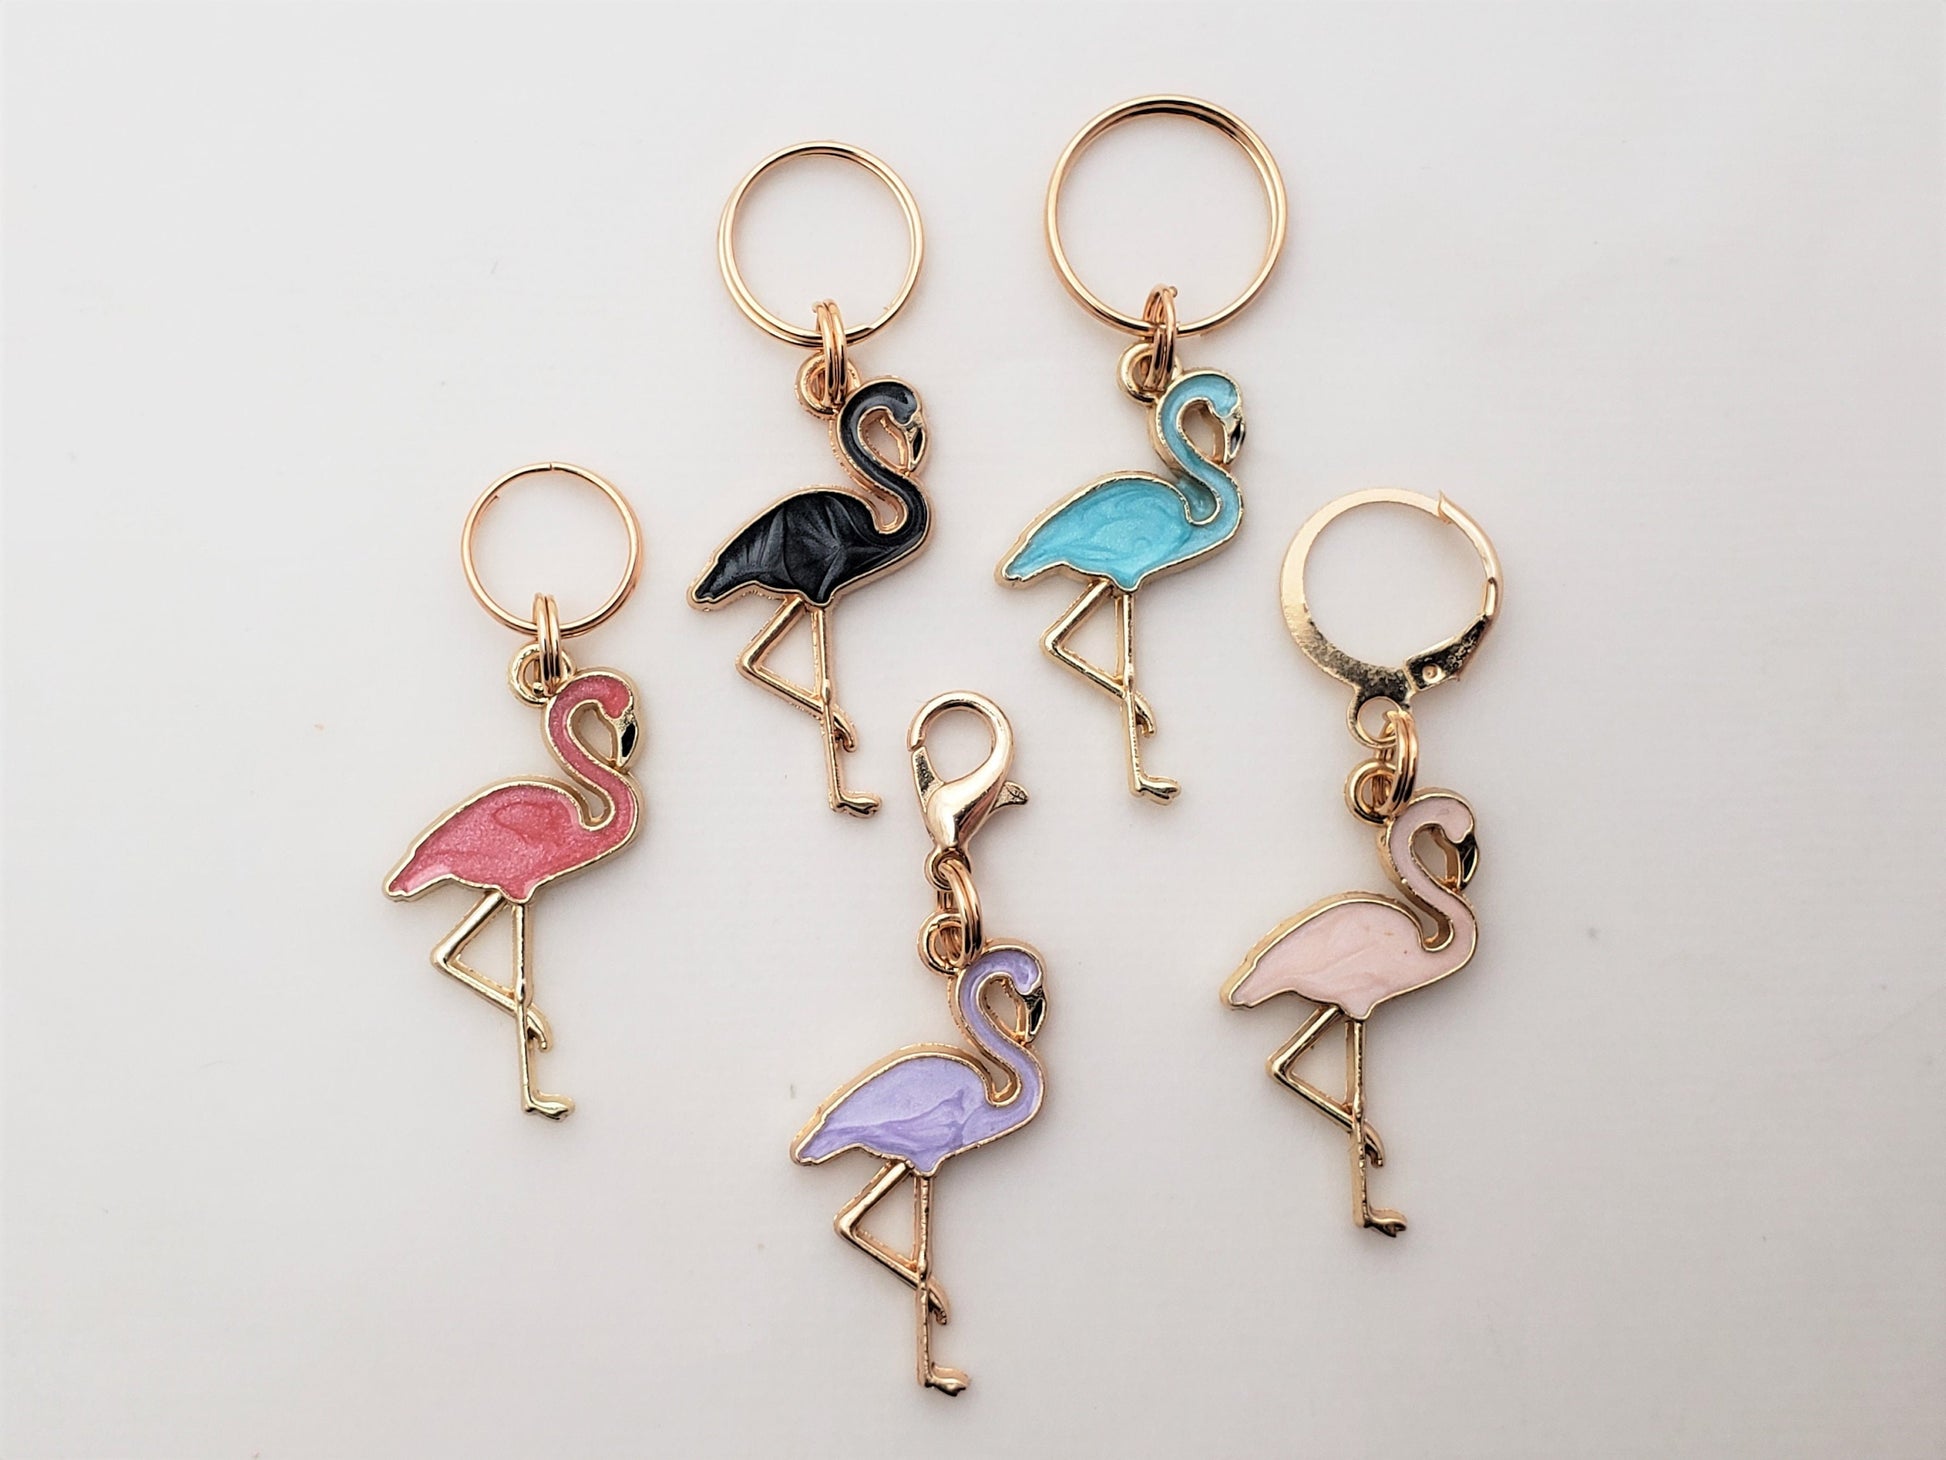 Stitch Markers for Knitting, Flamingos 5pc | Crochet stitch marker, progress keeper, project bag charms, crochet accessories